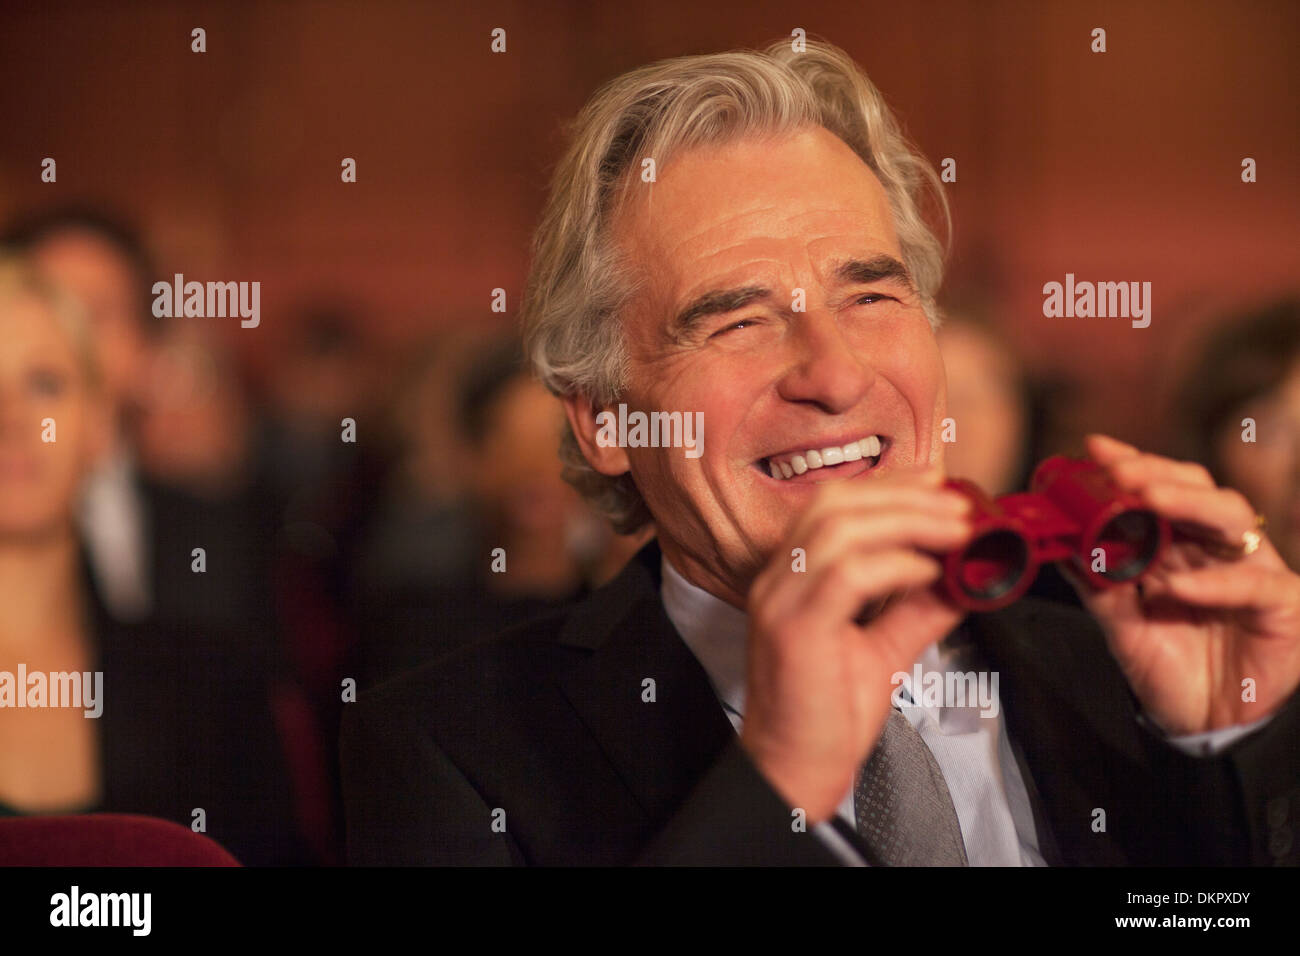 Man with opera glasses laughing in theater audience Stock Photo